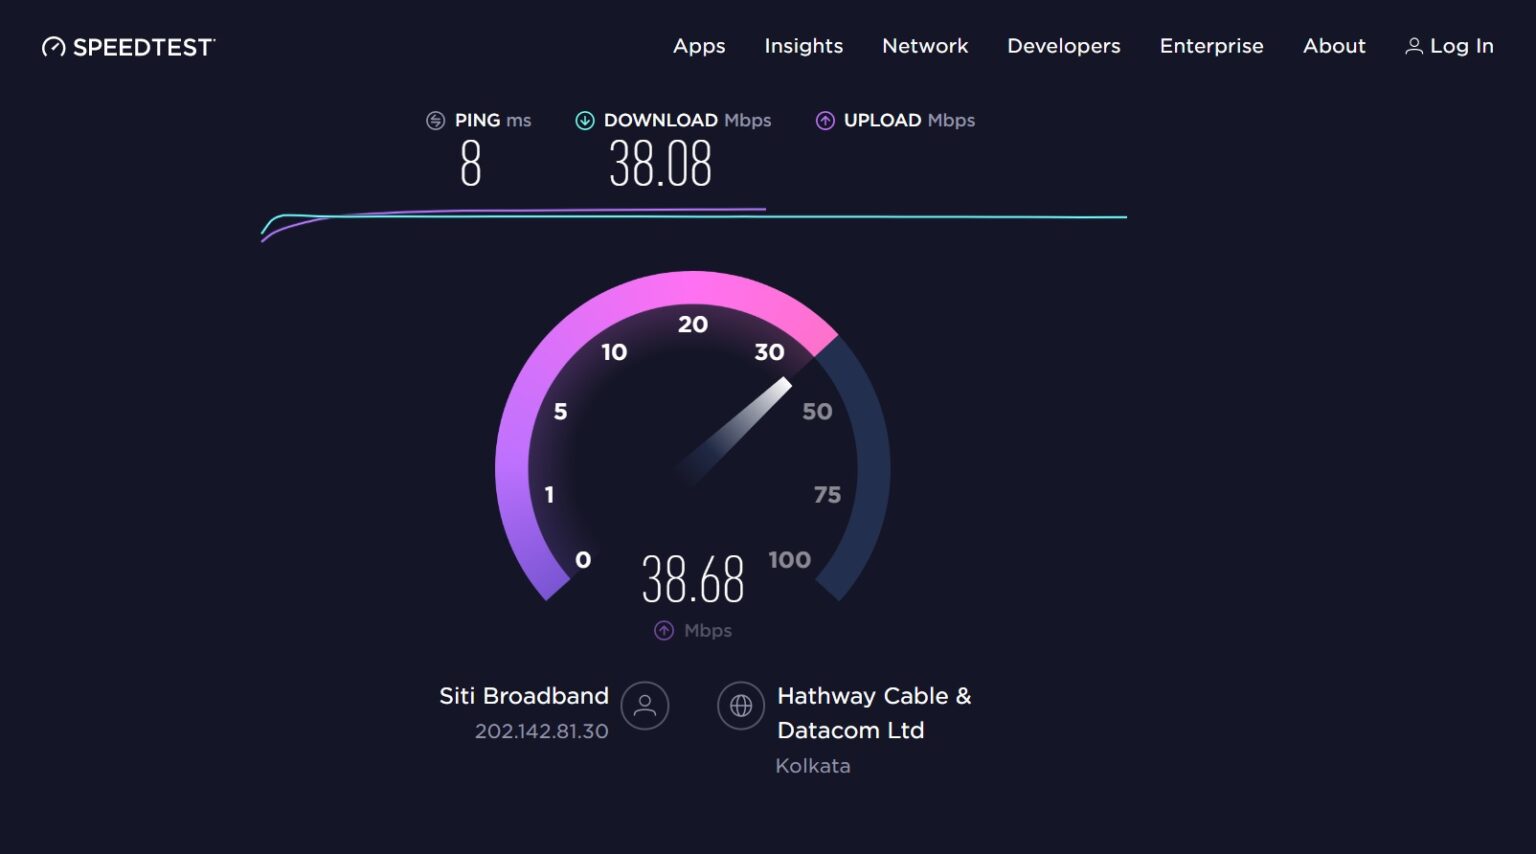 how to match my connection to speedtest by ookla